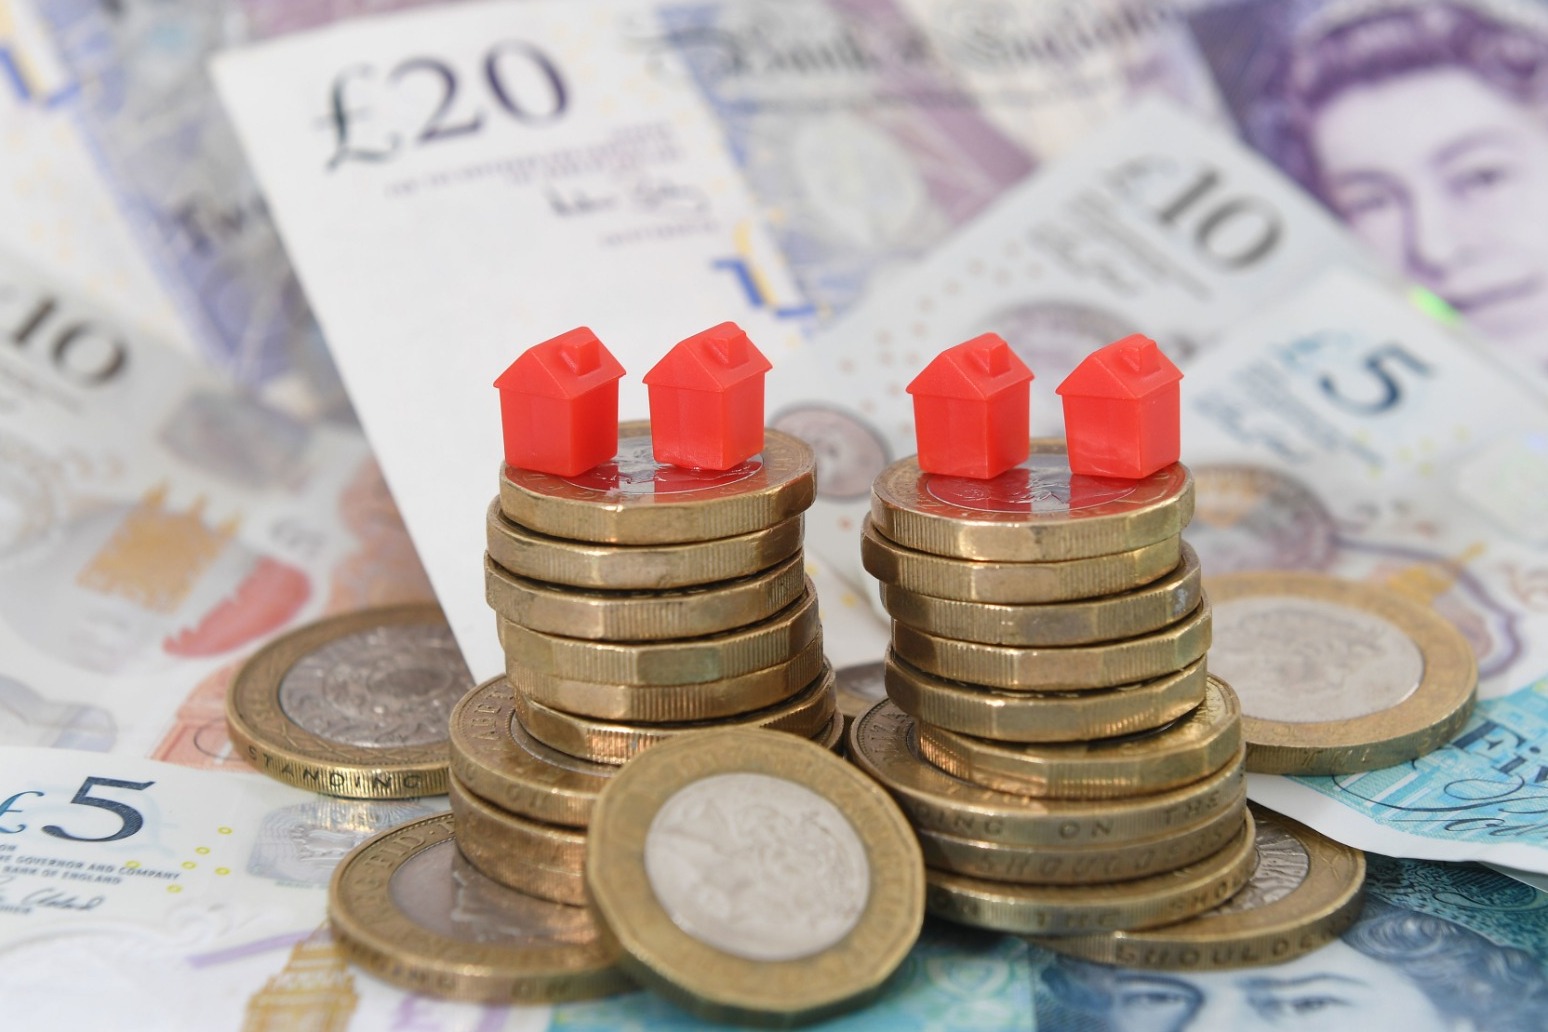 Mortgage lending fell in 2019 according to figures from UK Finance 